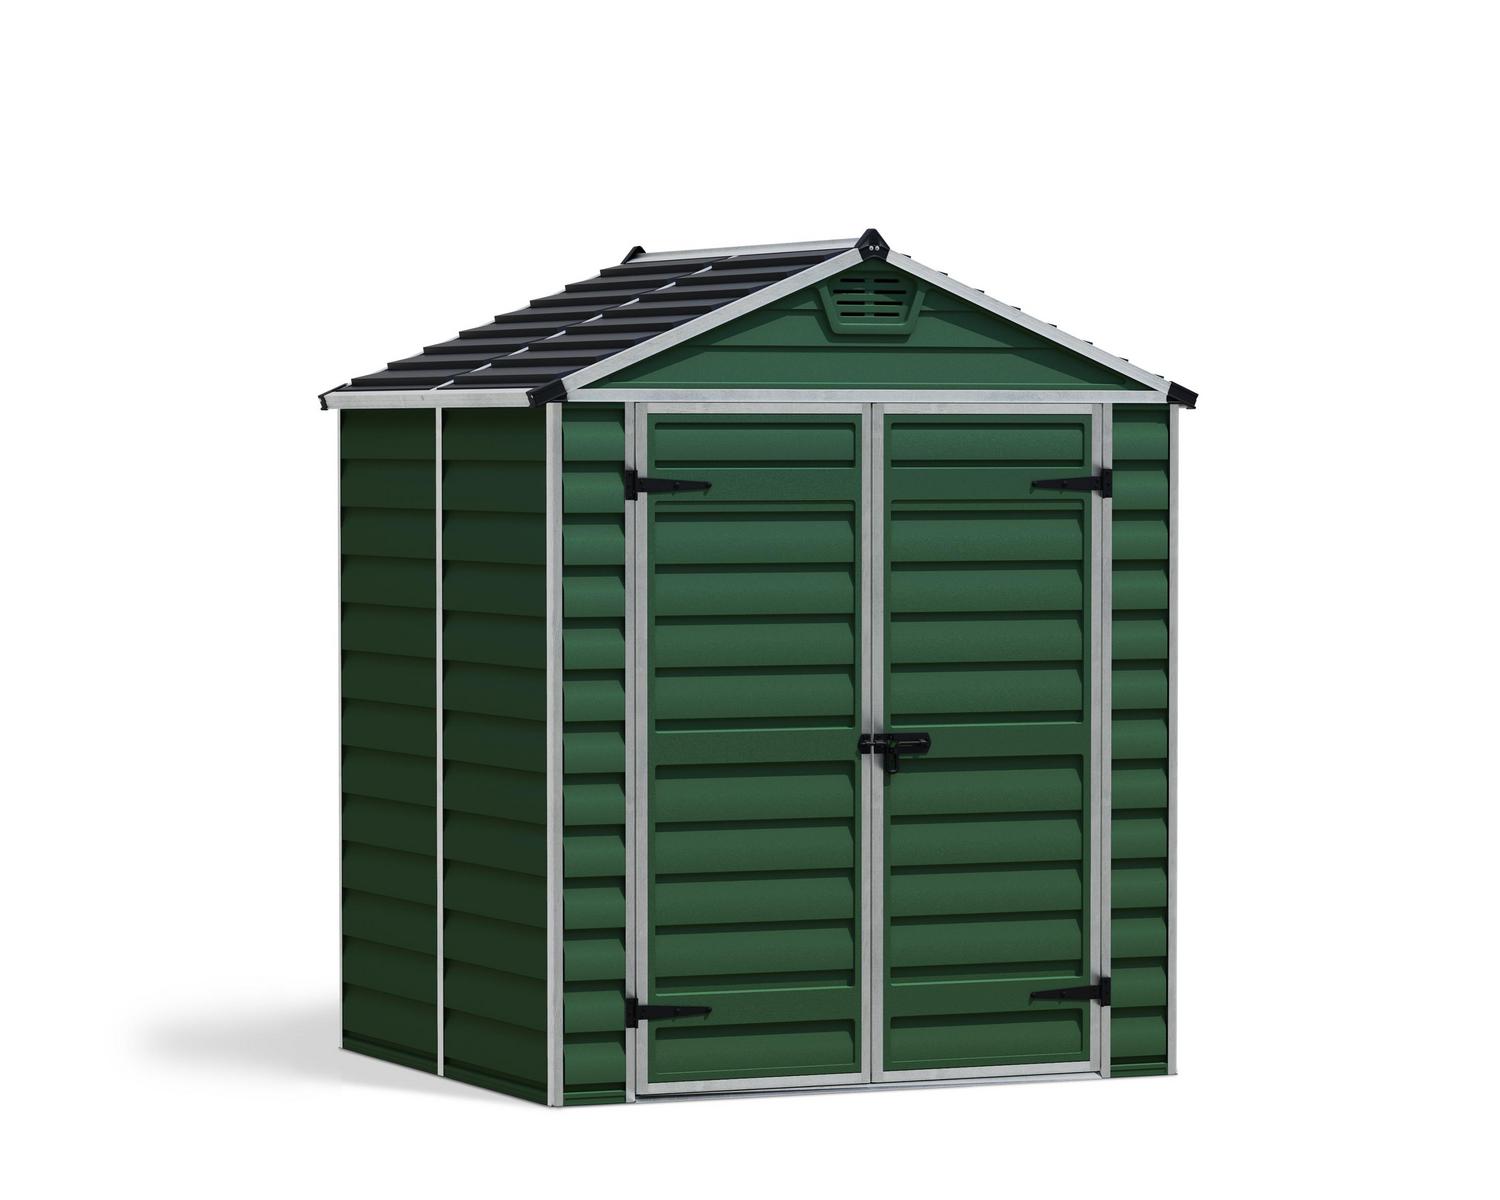 Skylight 6 ft. x 5ft. Plastic Storage Shed with Green Polycarbonate Panels &amp; Aluminium Frame